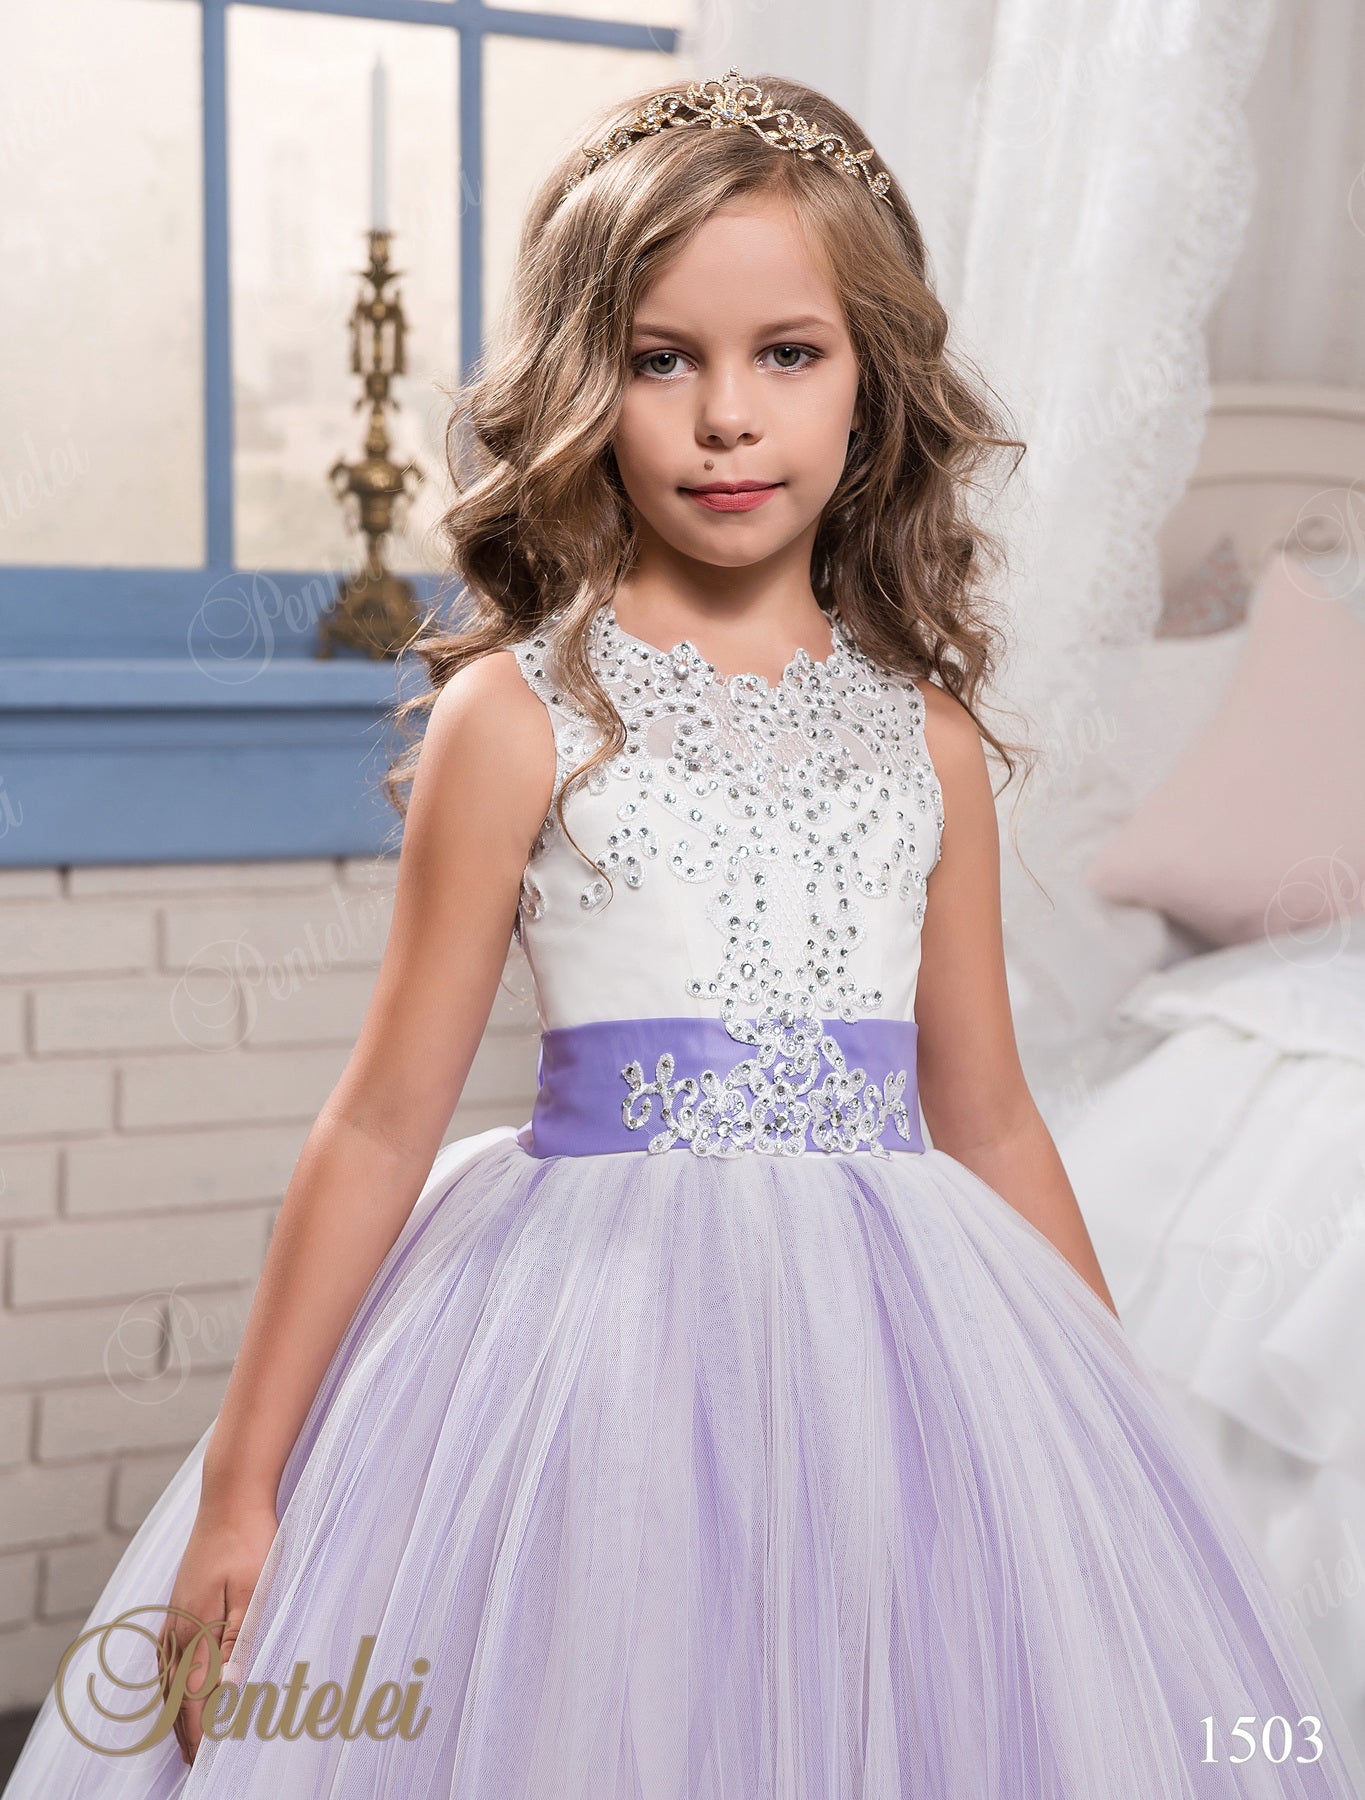 Pentelei 1503 Magical Lace and Tulle Two Color Flower Girl Dress ...